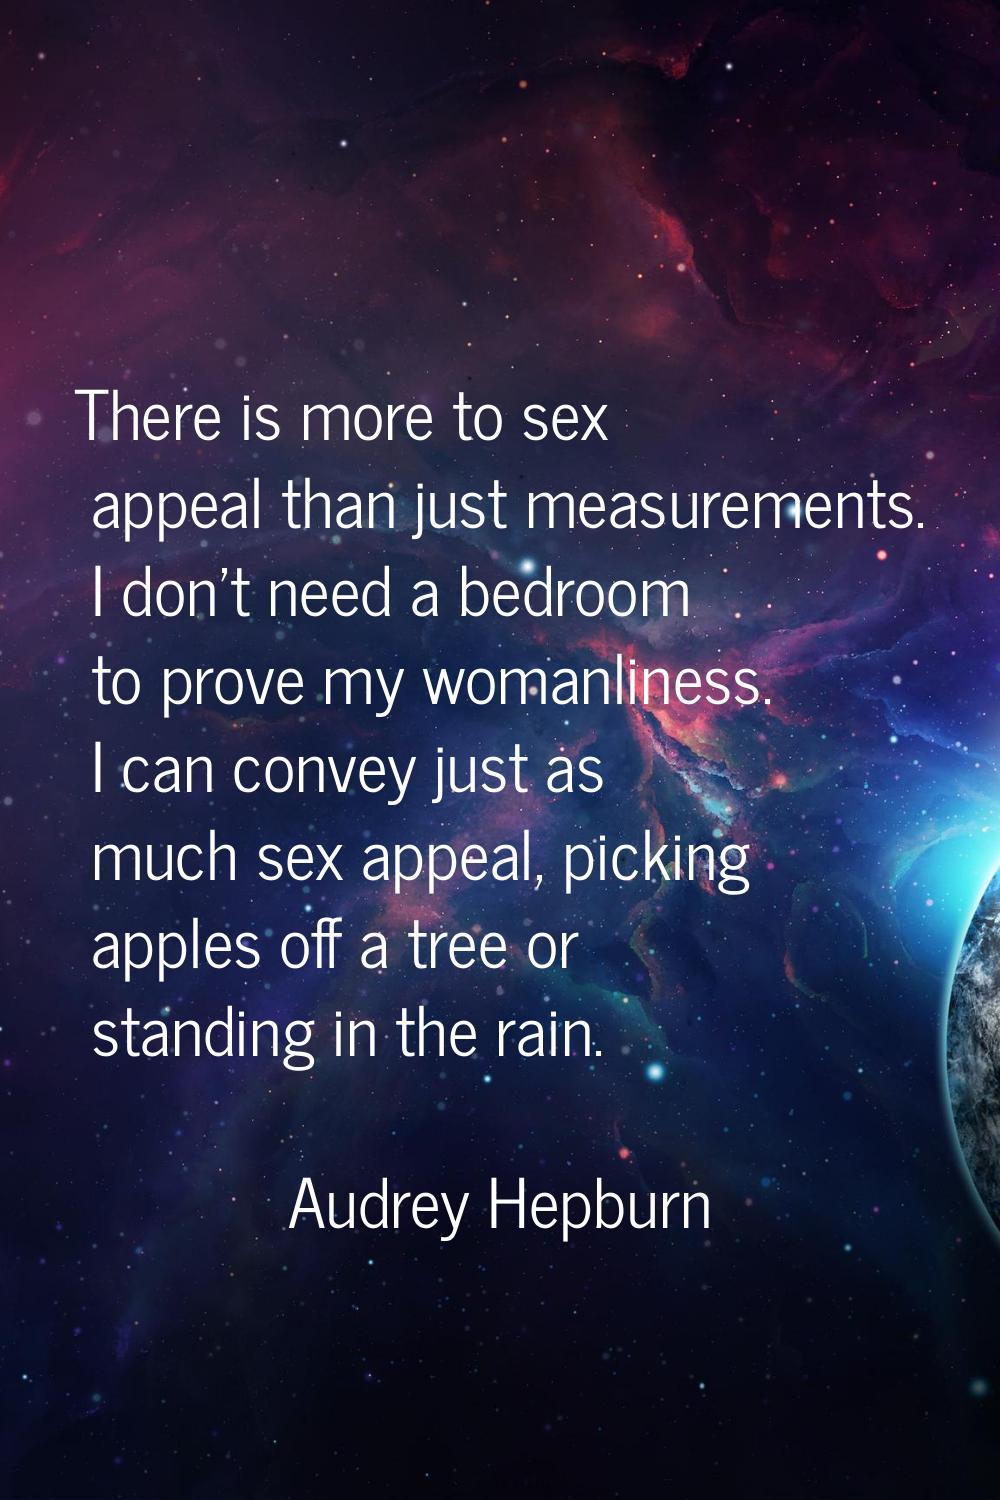 There is more to sex appeal than just measurements. I don't need a bedroom to prove my womanliness.